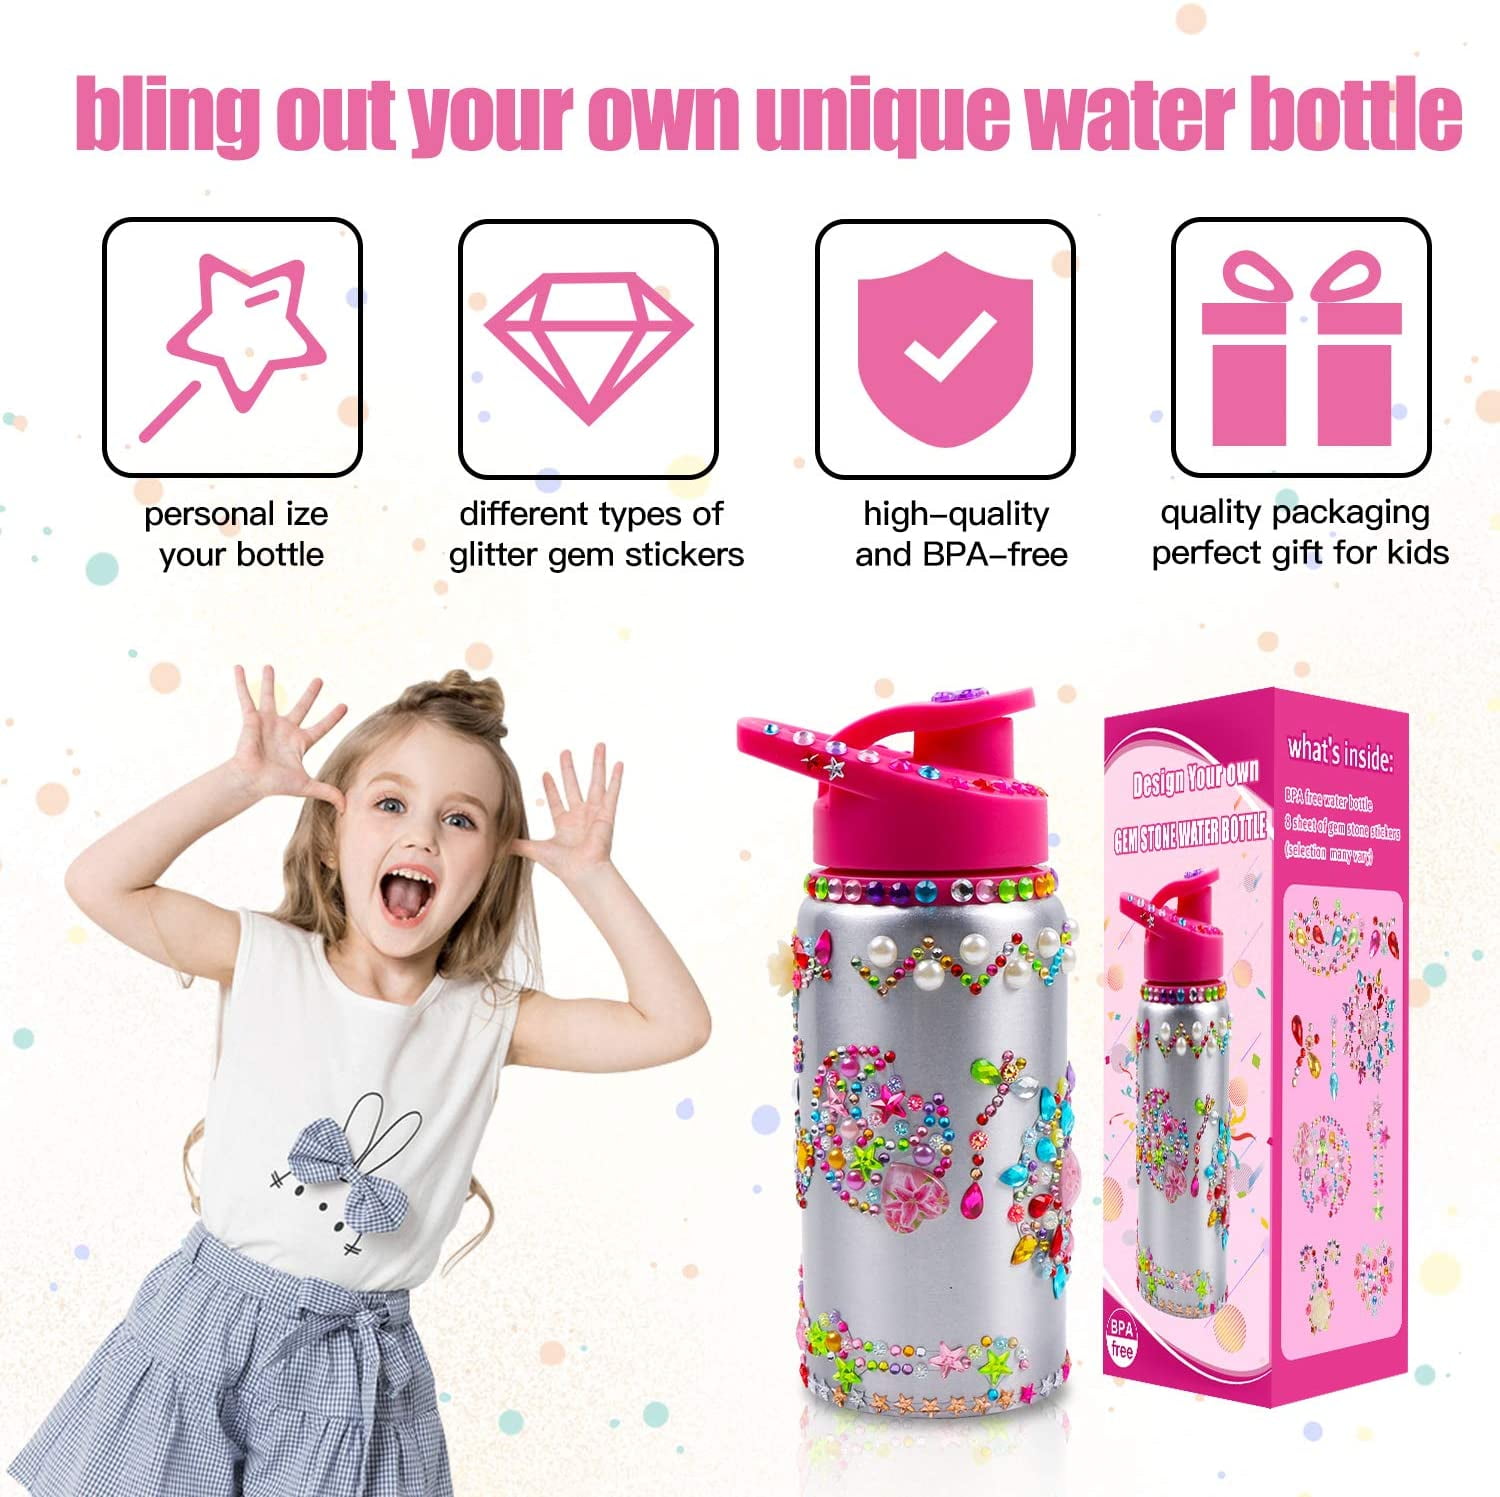 Cocomelon Decorate Your Own Water Bottle by Creative Kids - BPA Free  Toddler Water Bottle with 4 Sheets of Customized Stickers - DIY Arts and  Crafts 